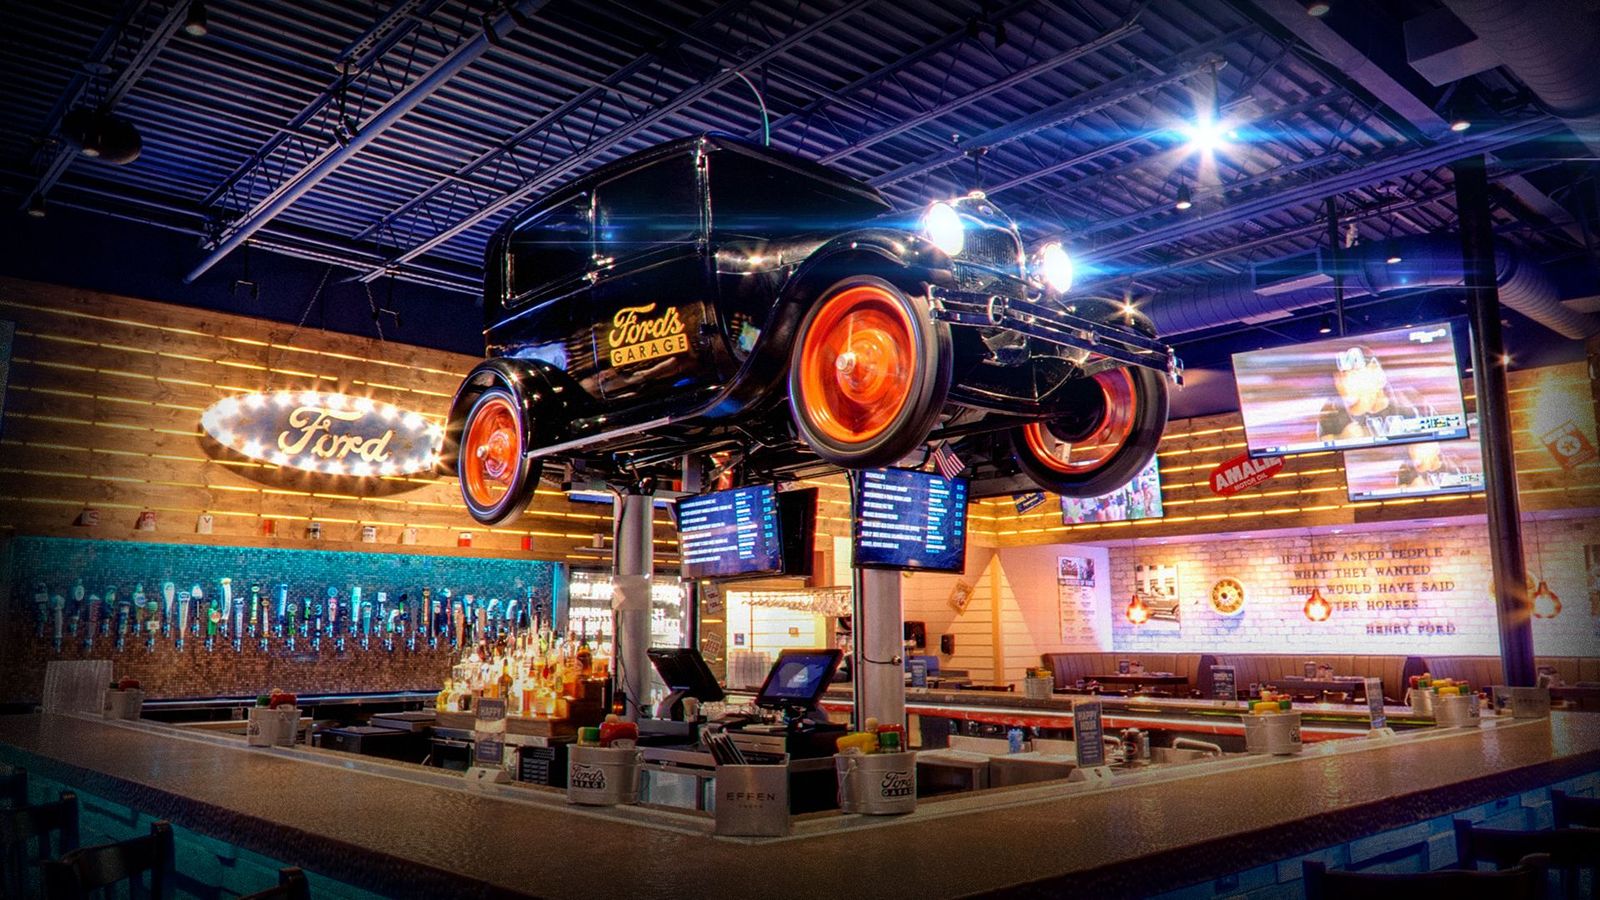 Ford's Garage Serving Up Burgers With A Side Of Automotive History